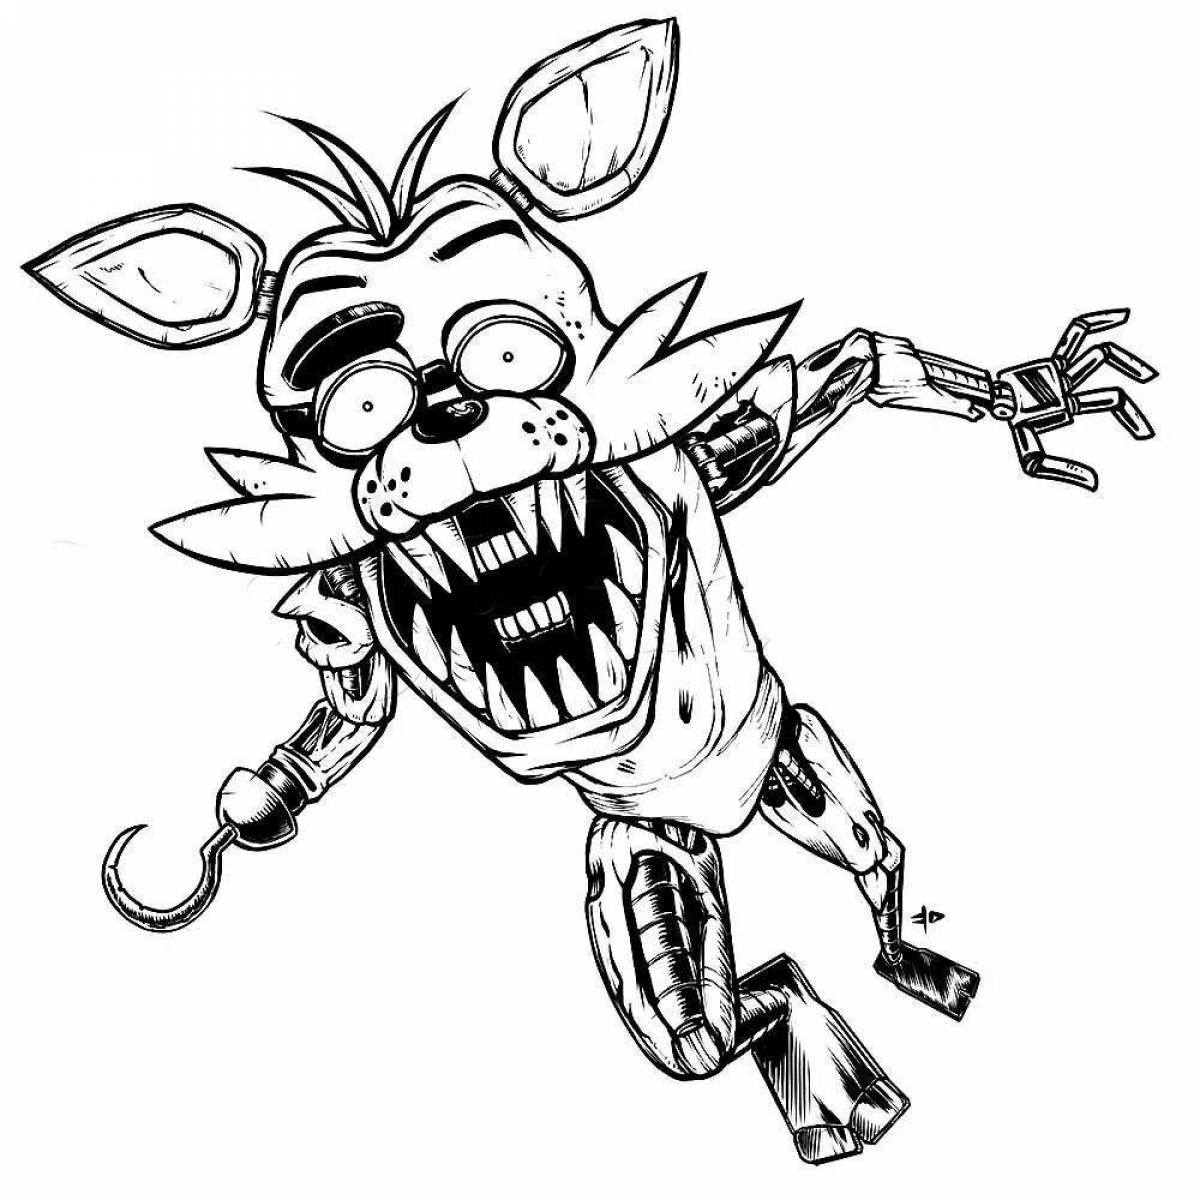 Foxy boo live coloring page